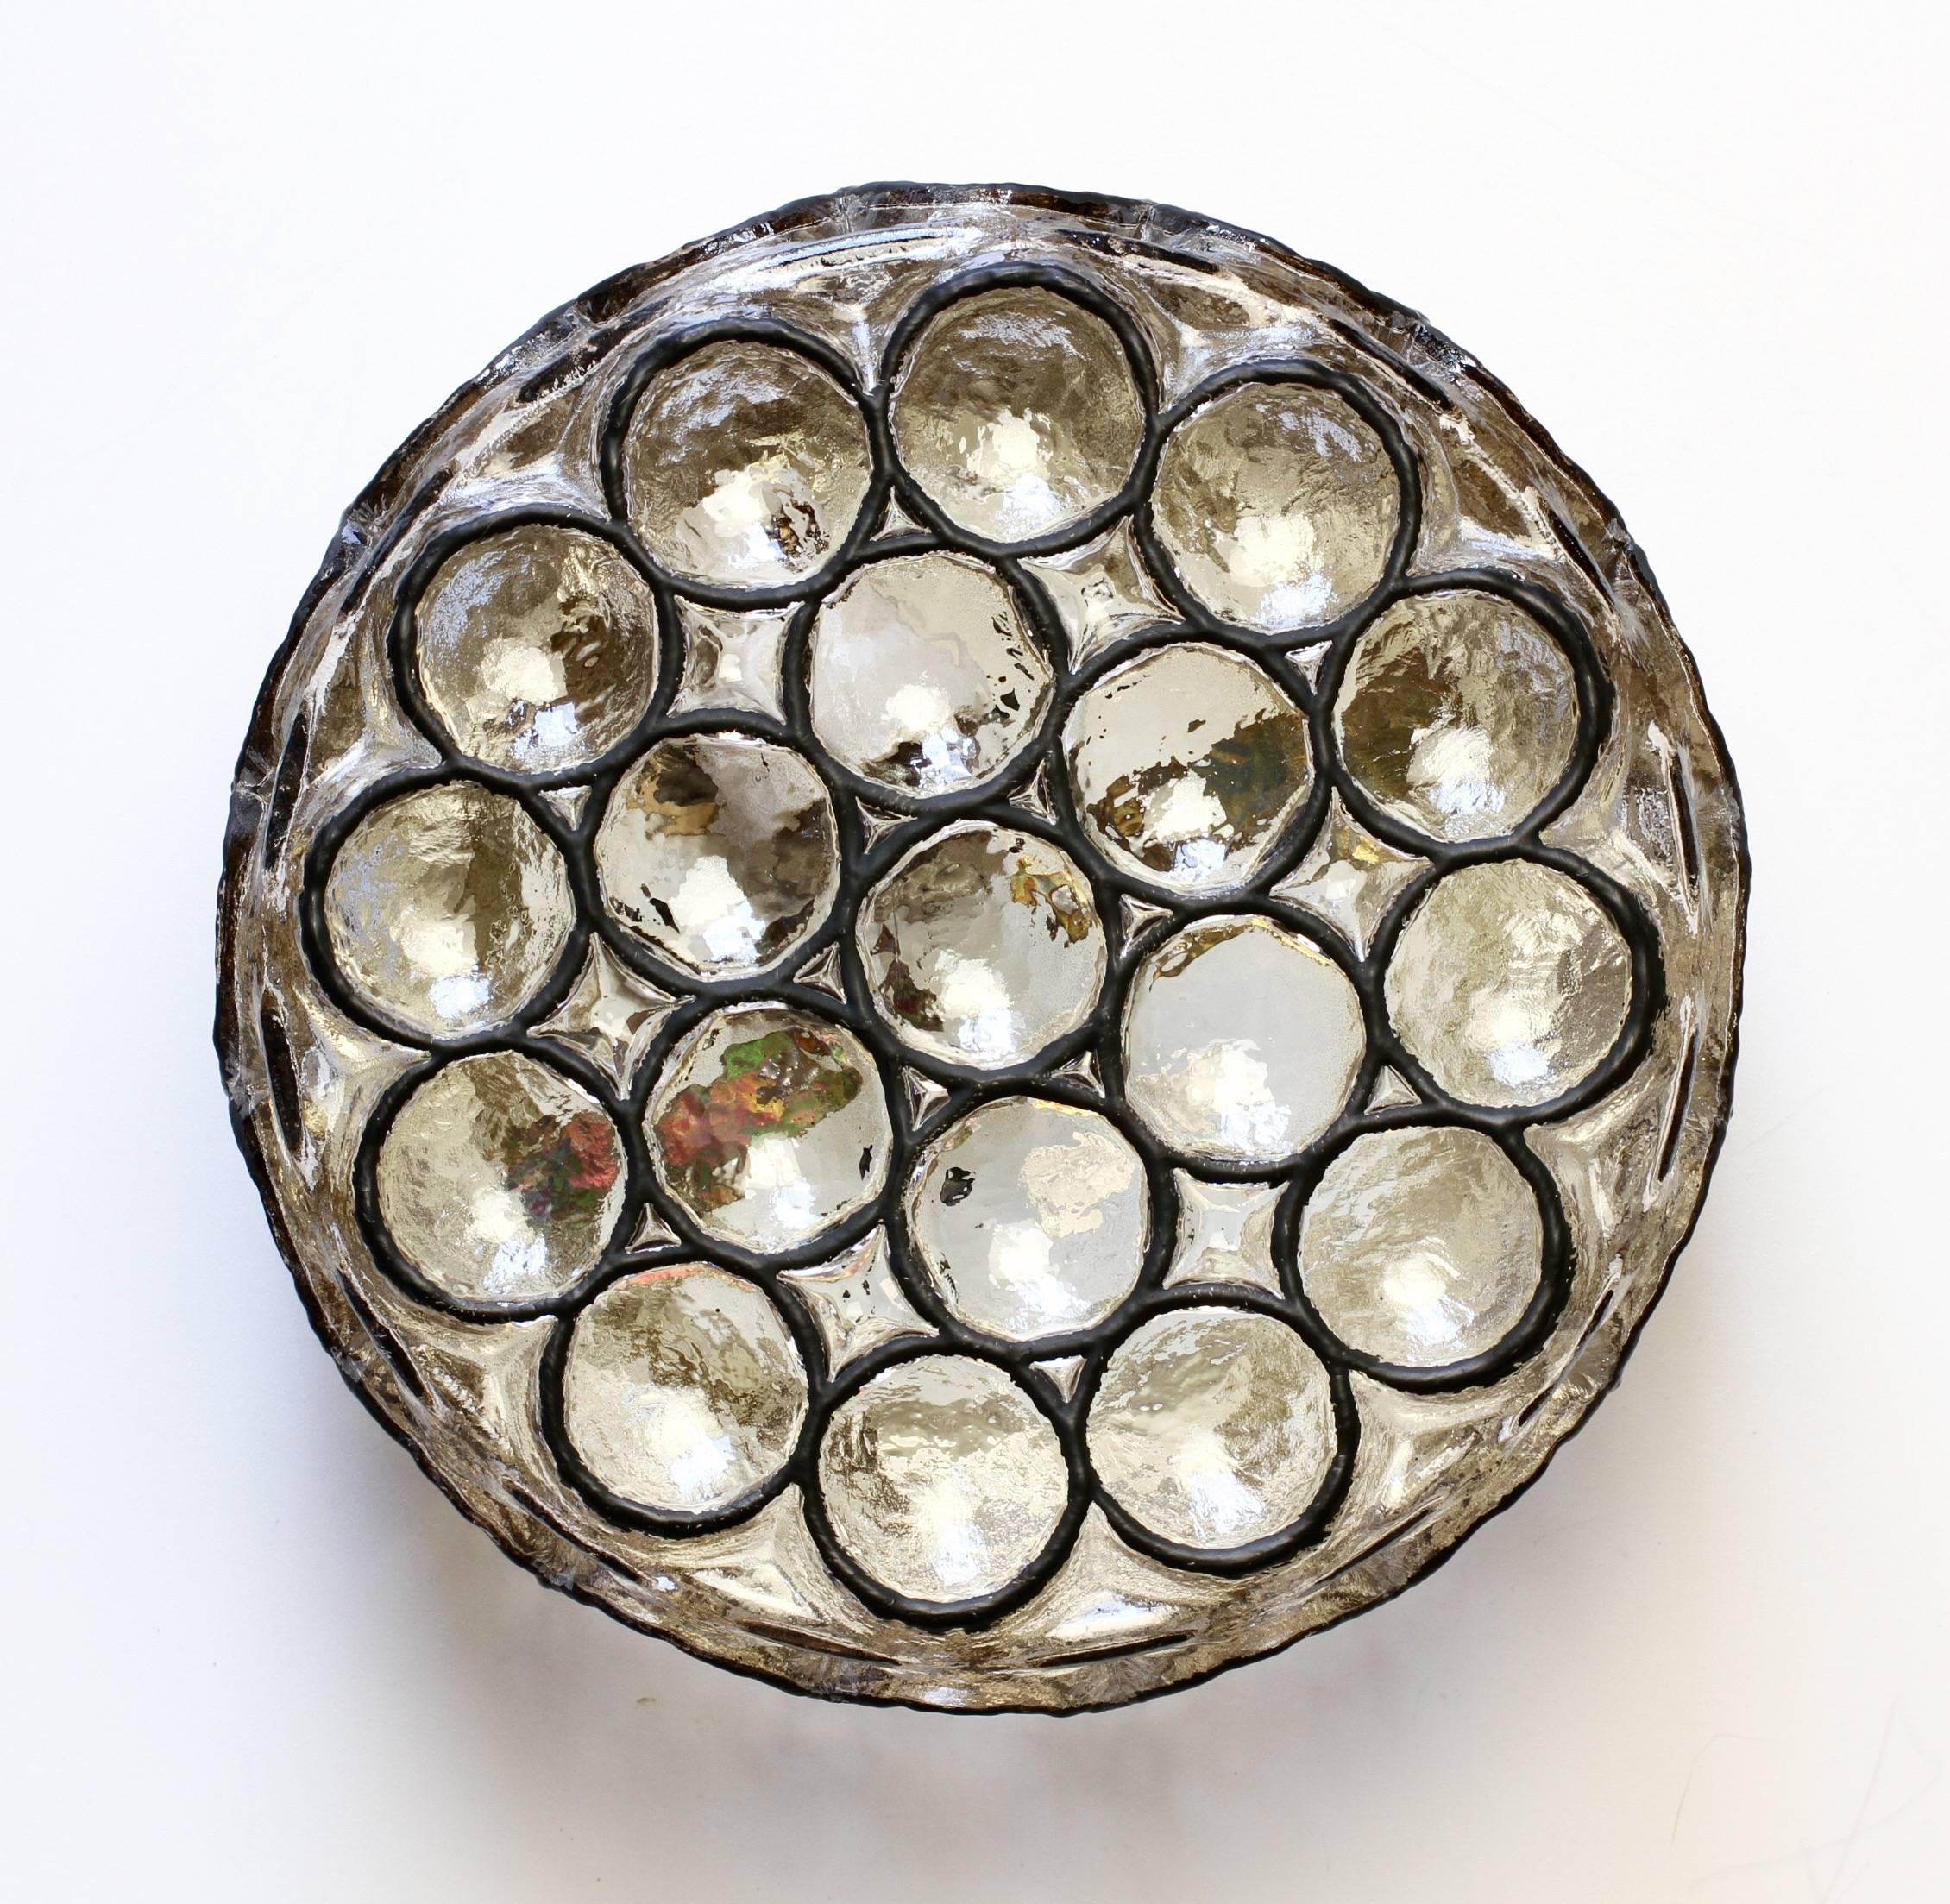 One of a beautiful pair of circular iron and glass flush mount lights / sconces by Glashütte Limburg, Germany circa 1965. Featuring thick heavy blown glass with concaved round "Iron" rings which cast a wonderful light across a wall or